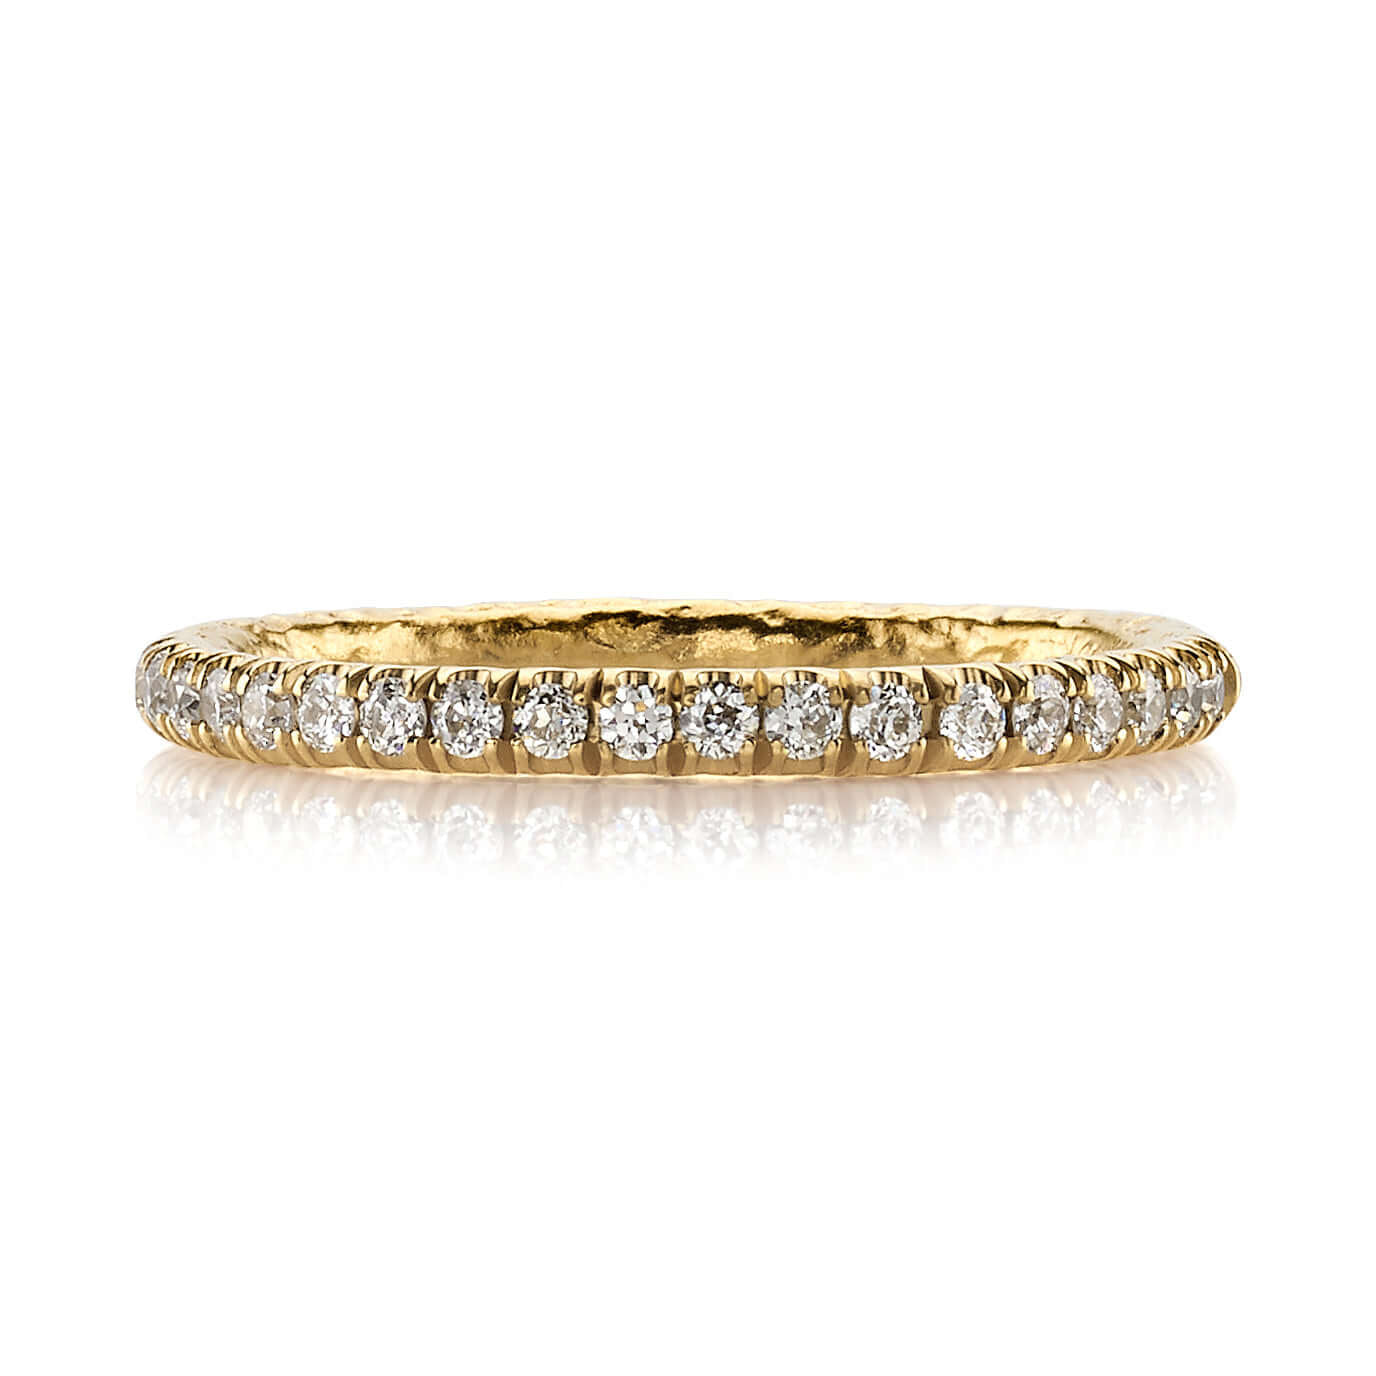 SINGLE STONE STEVIE BAND | Approximately 0.24ctw G-H/VS old European cut diamonds pave set in a handcrafted hammered 22K yellow gold half eternity band. Approximate band with 2mm. Please inquire for additional customization.